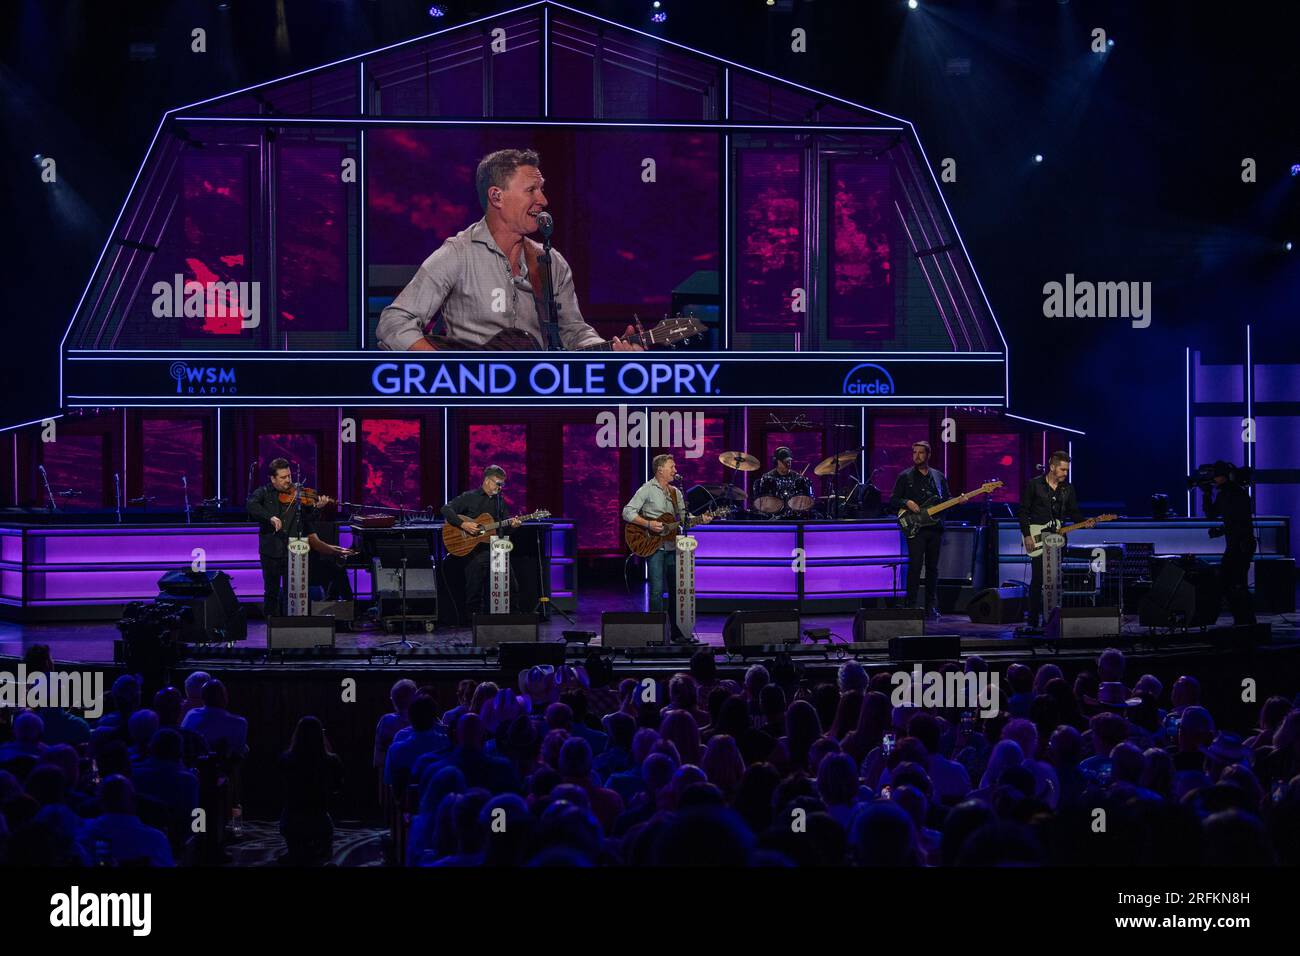 Nashville, United States. 29 July, 2023. Country music artist and U.S. Army veteran Craig Morgan performing onstage at the historic Grand Ole Opry, July 29, 2023 in Nashville, Tennessee, USA. The 59-year-old singer took the oath of service and re-inlisted in the Army Reserves during the show and will serve as a Warrant Officer.  Credit: Lara Poirrier/U.S Army Photo/Alamy Live News Stock Photo